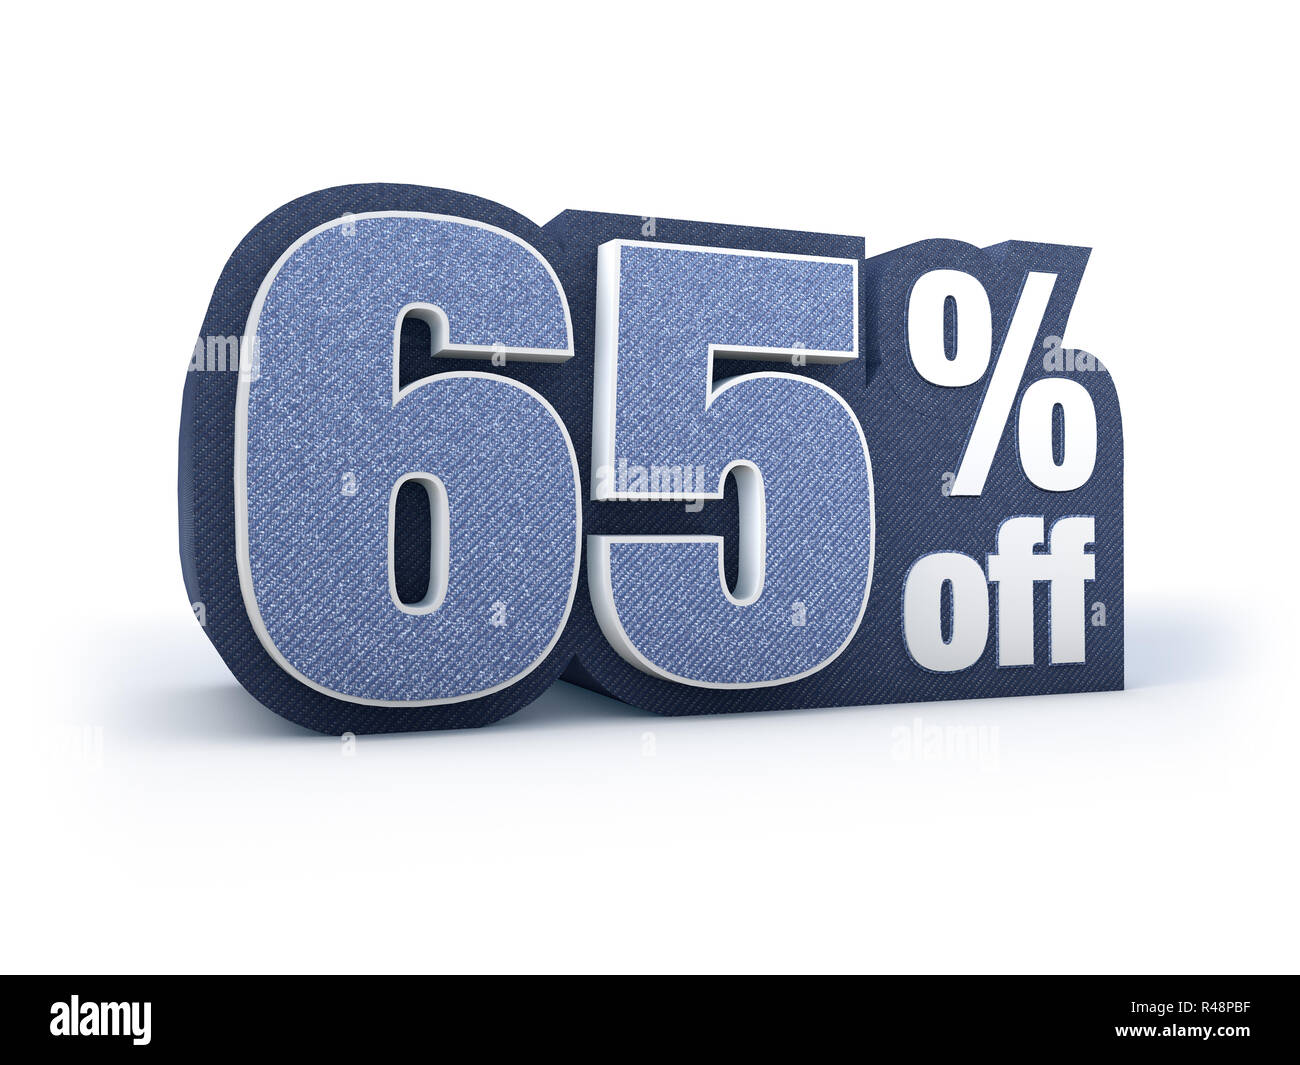 65 percent off denim styled discount price sign Stock Photo